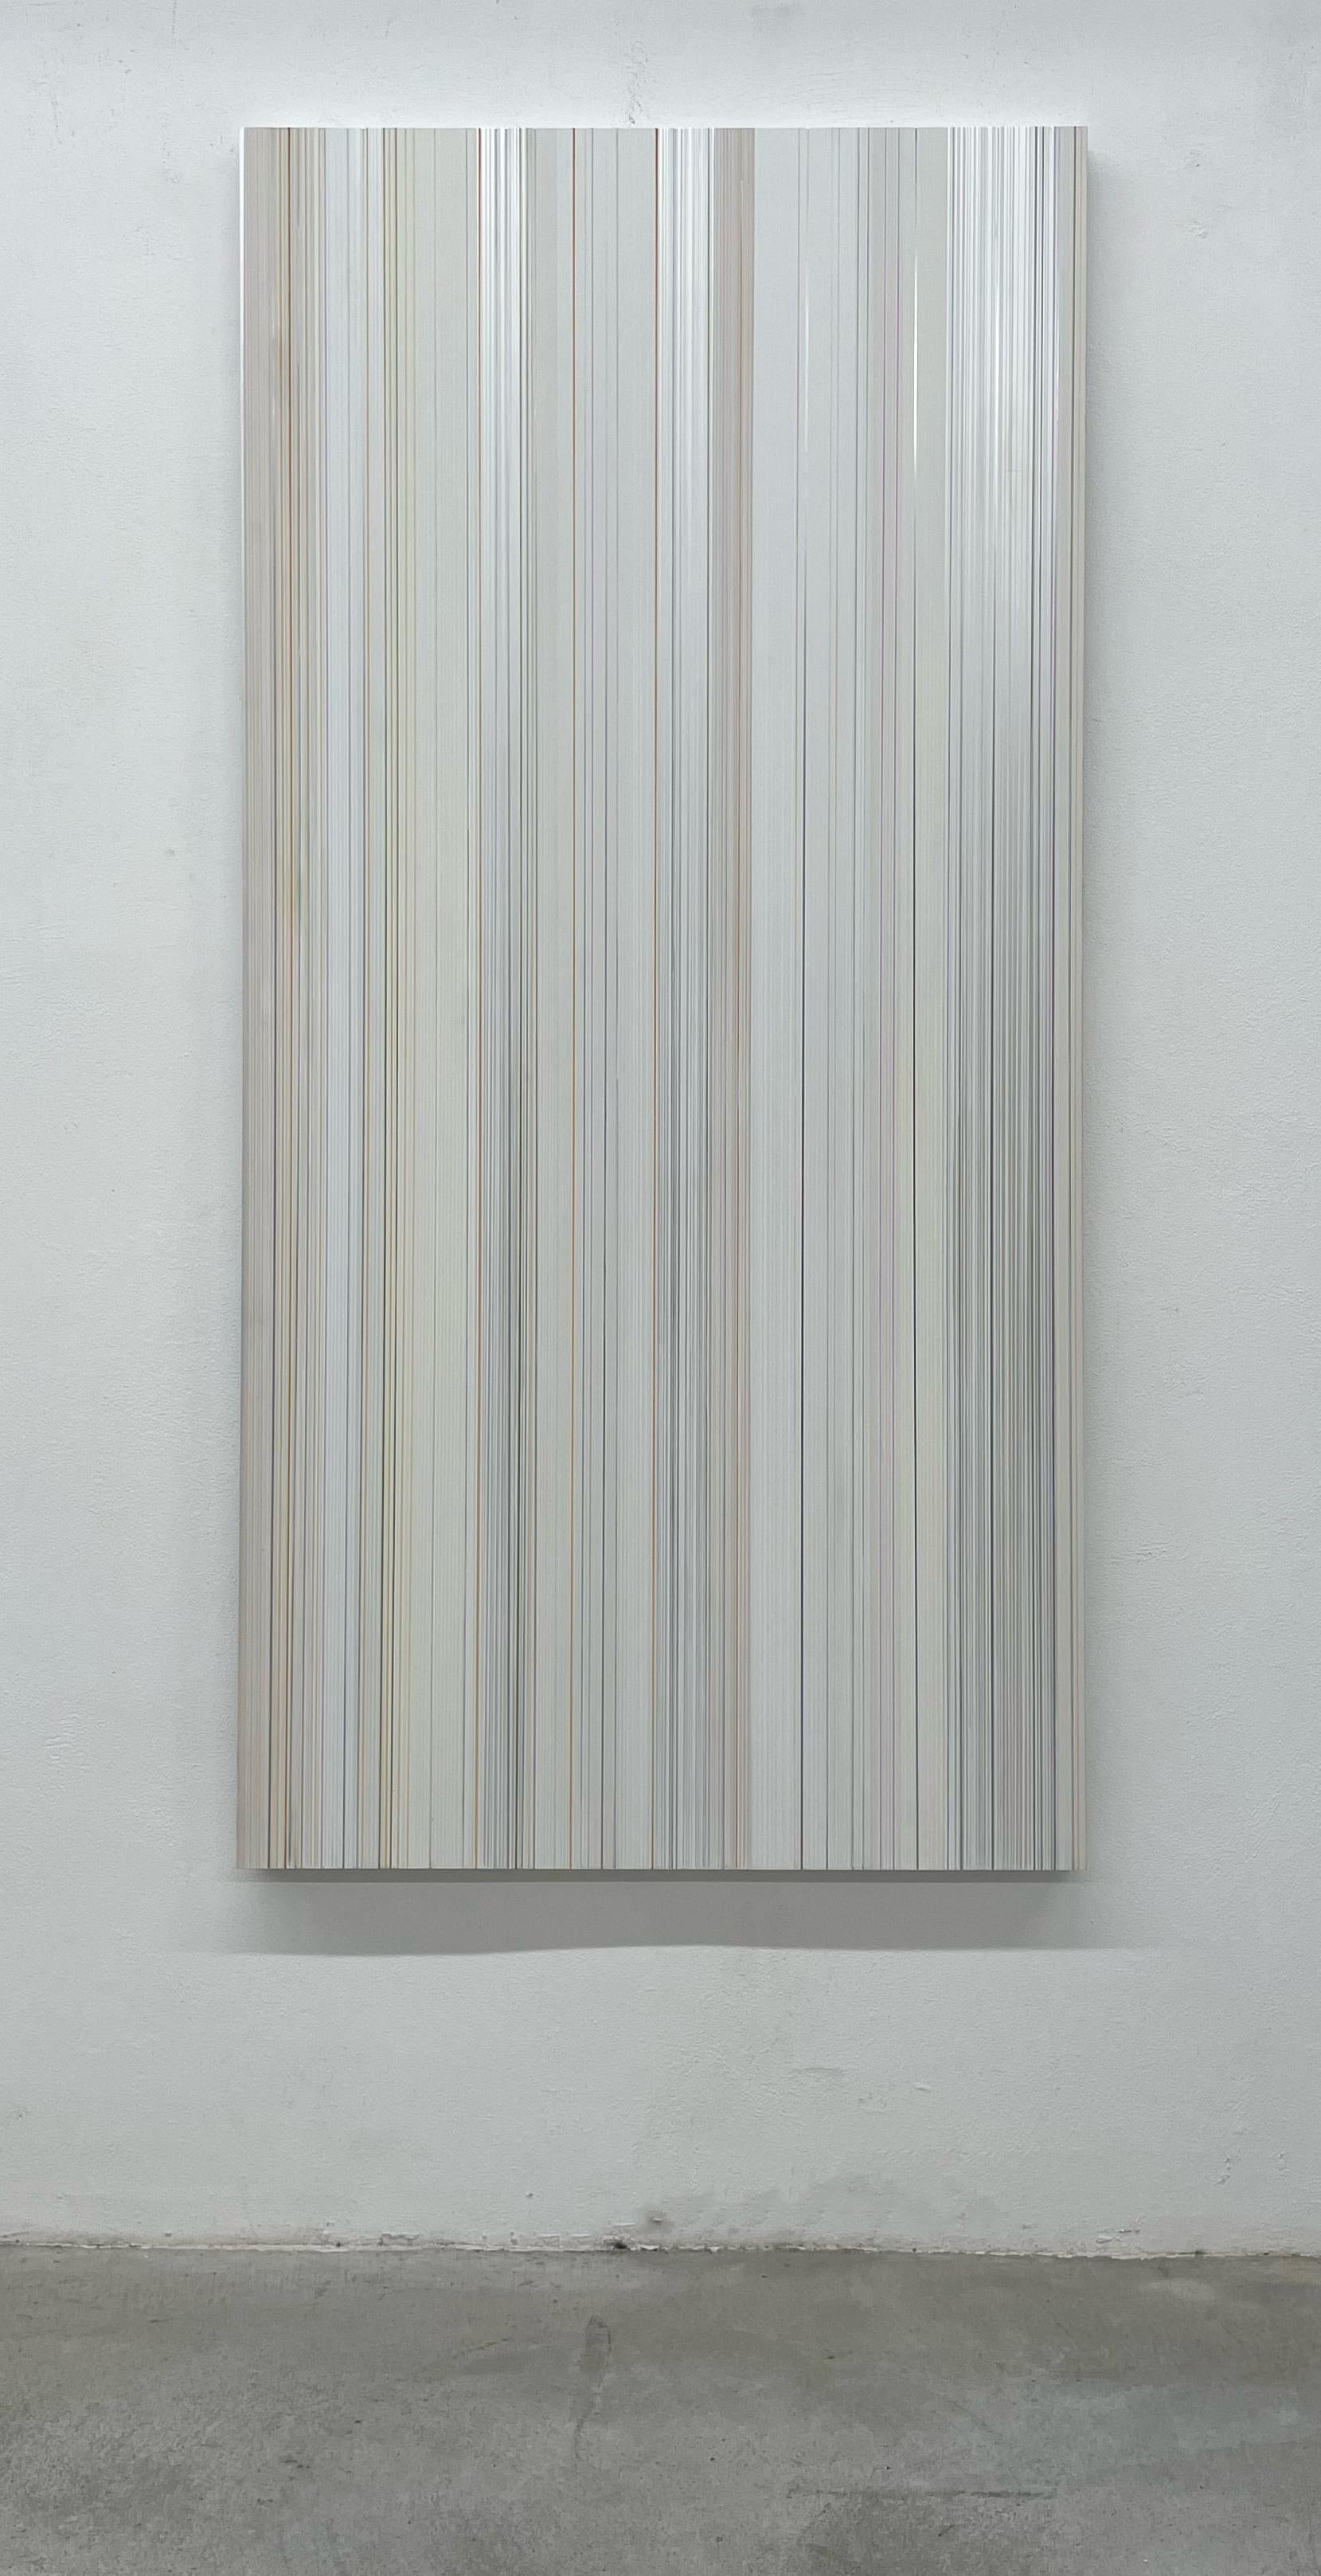 What I Never Told You- monochromatic abstract stripe painting on di-bond  - Painting by Marco Casentini